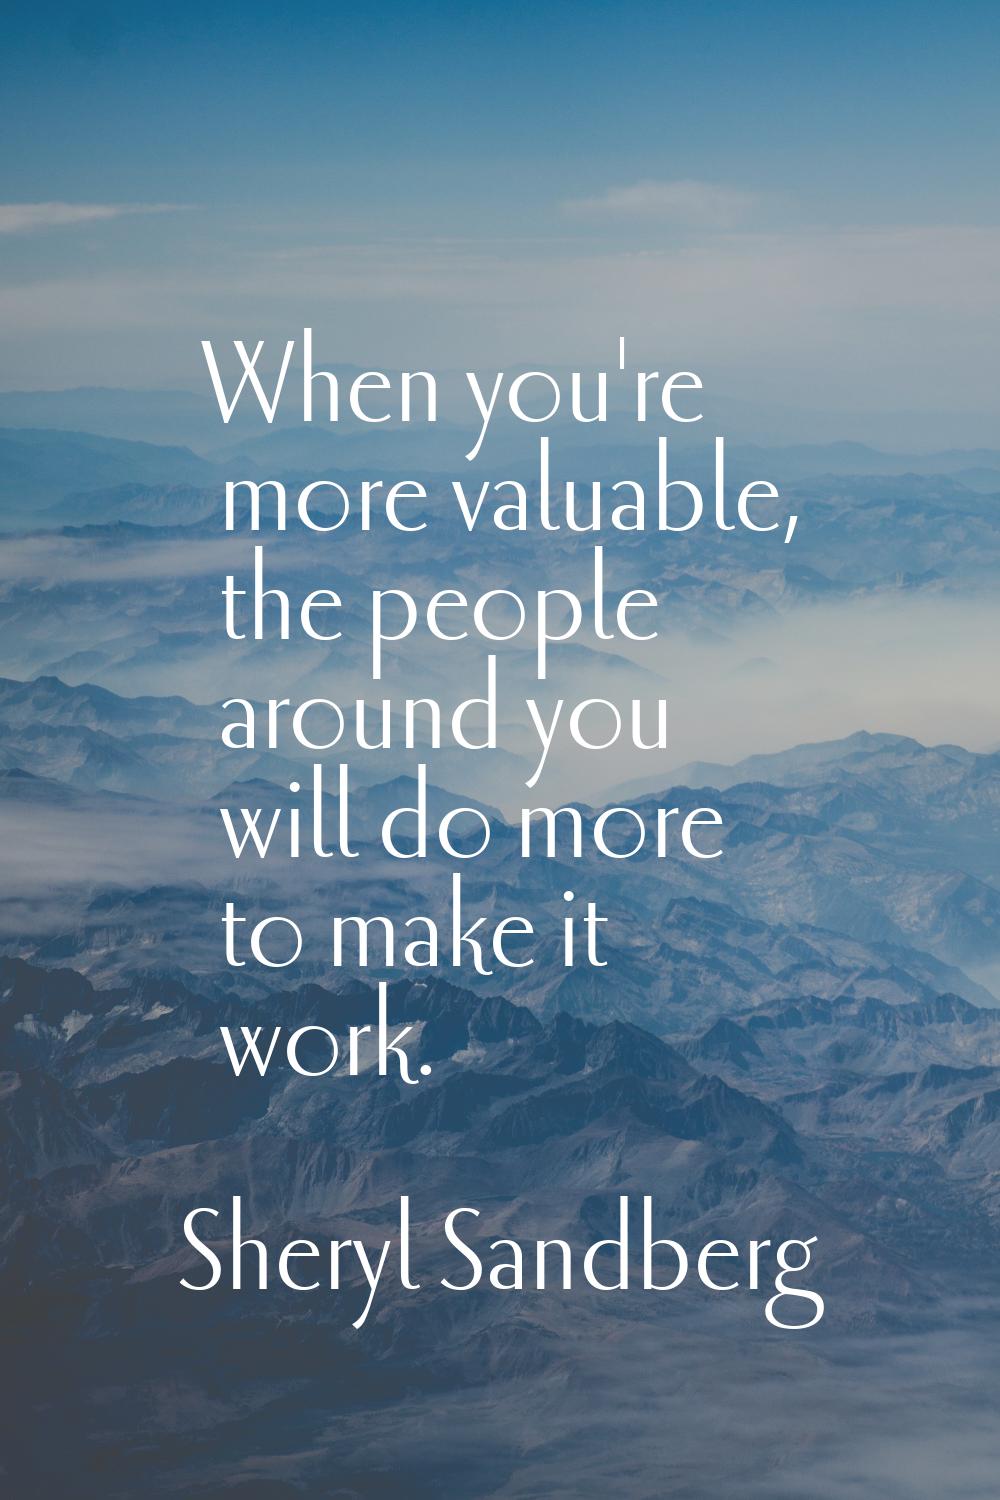 When you're more valuable, the people around you will do more to make it work.